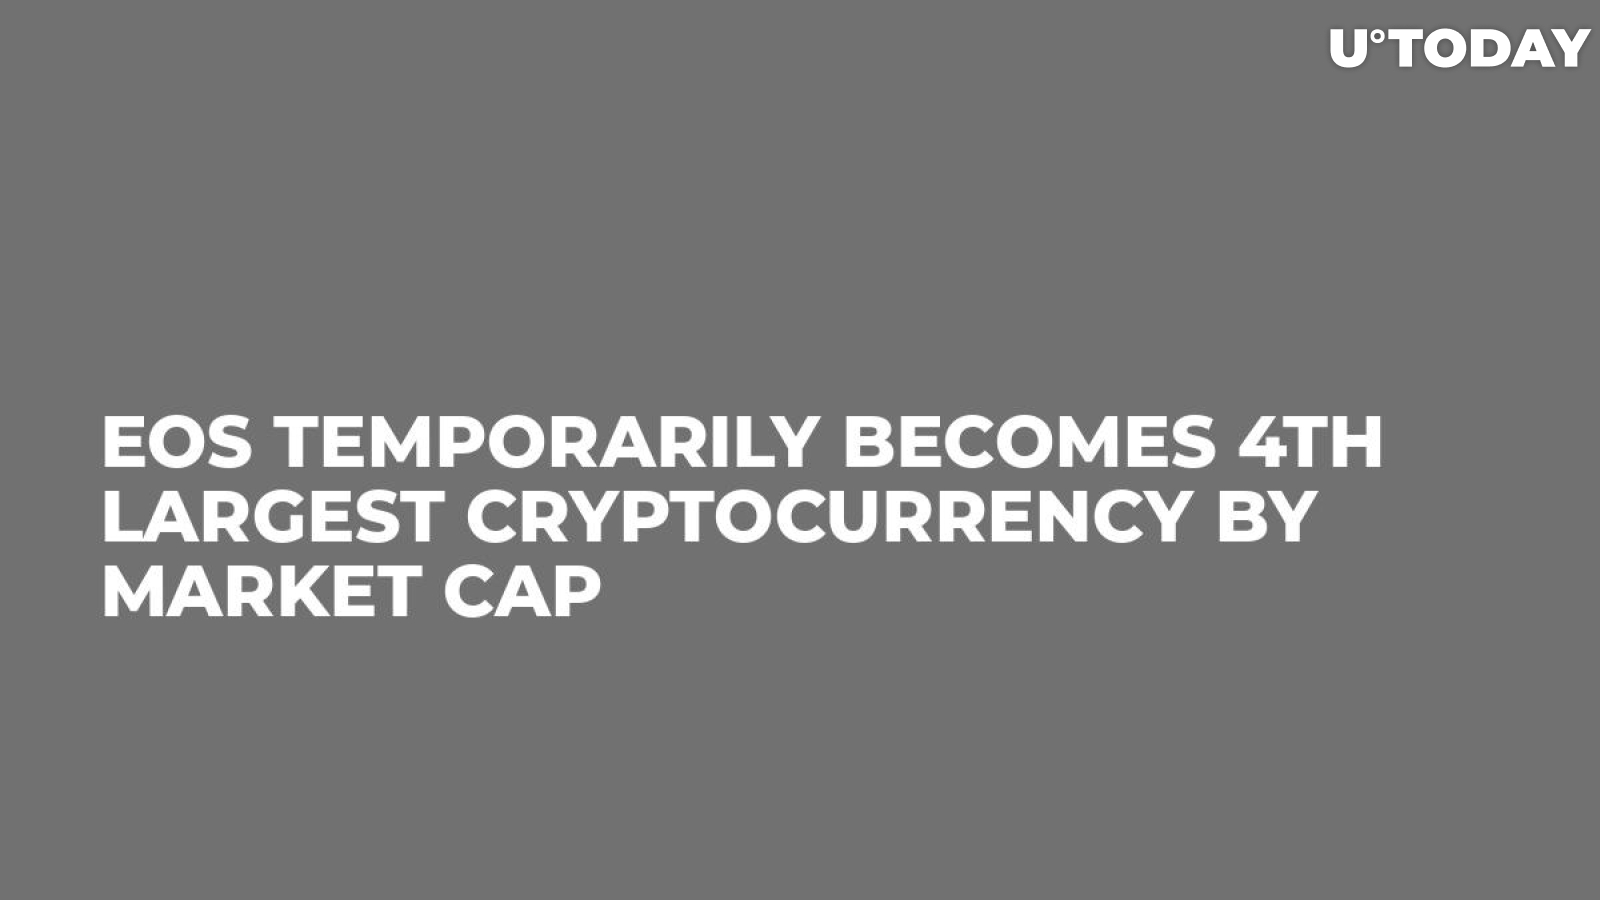 EOS Temporarily Becomes 4th largest Cryptocurrency by Market Cap